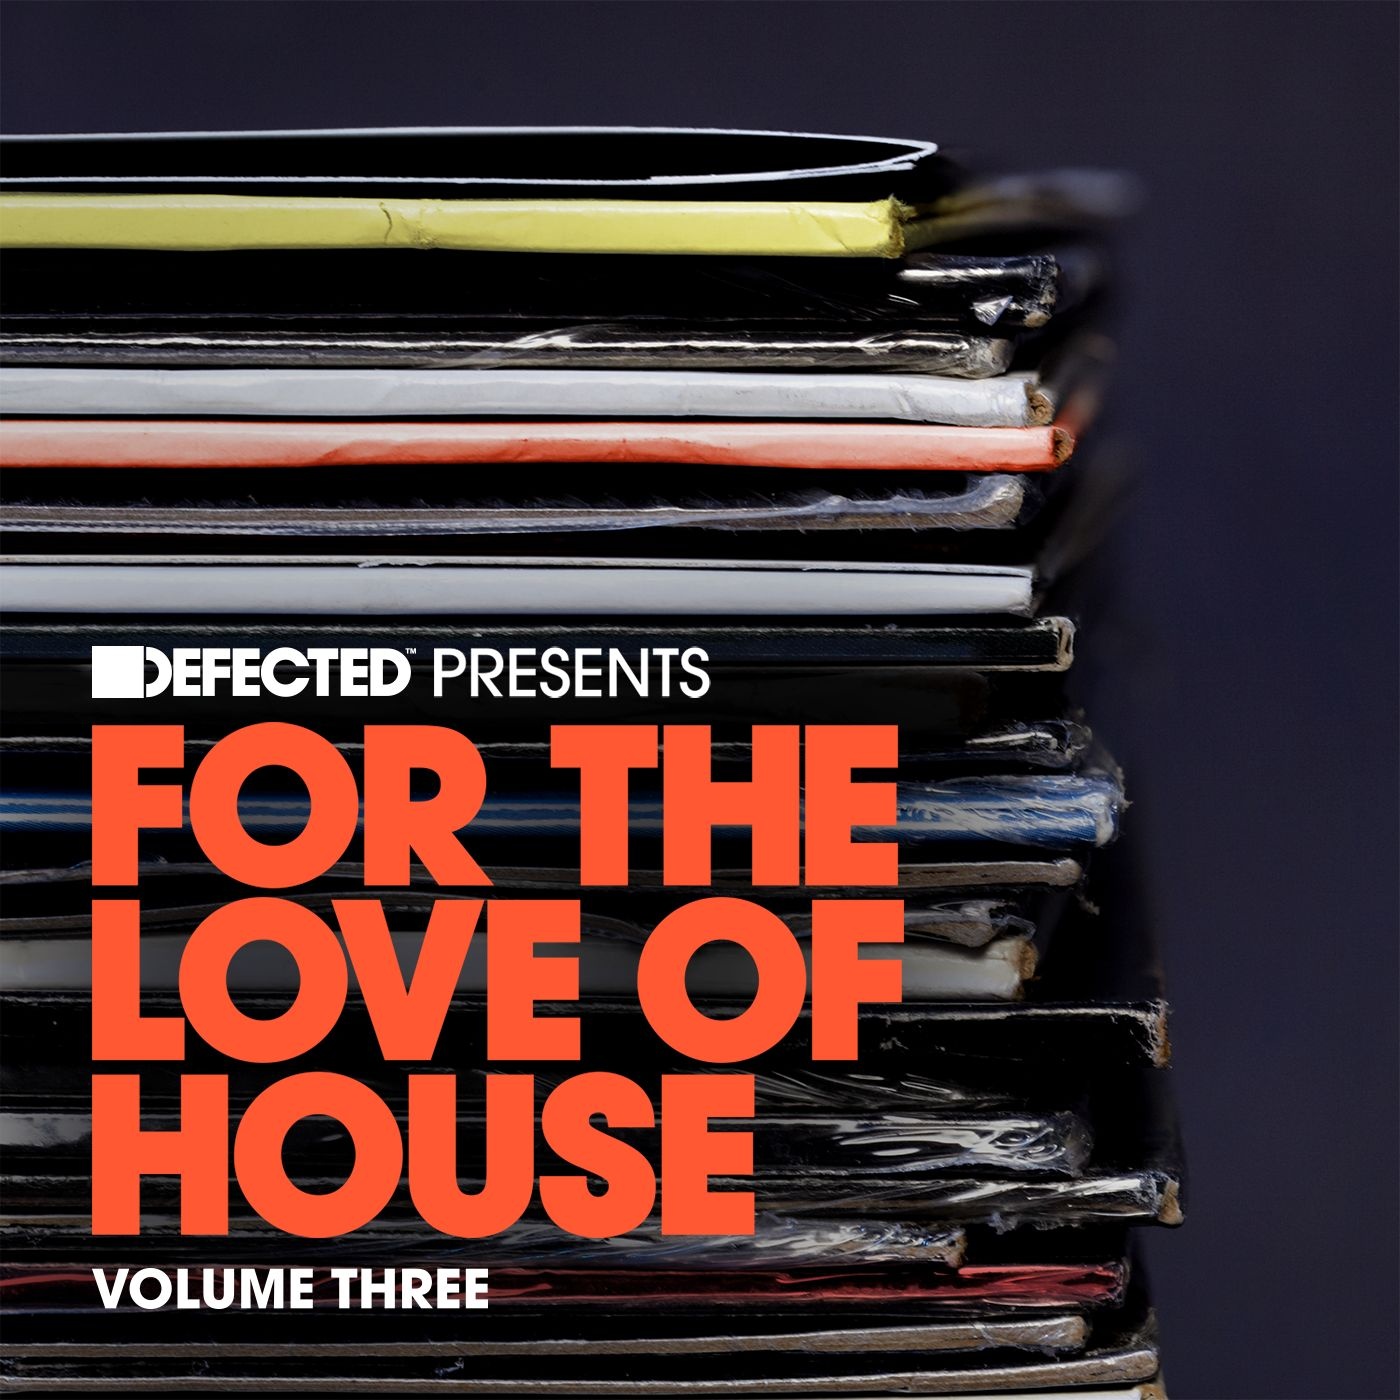 Defected presents For The Love Of House Volume 3